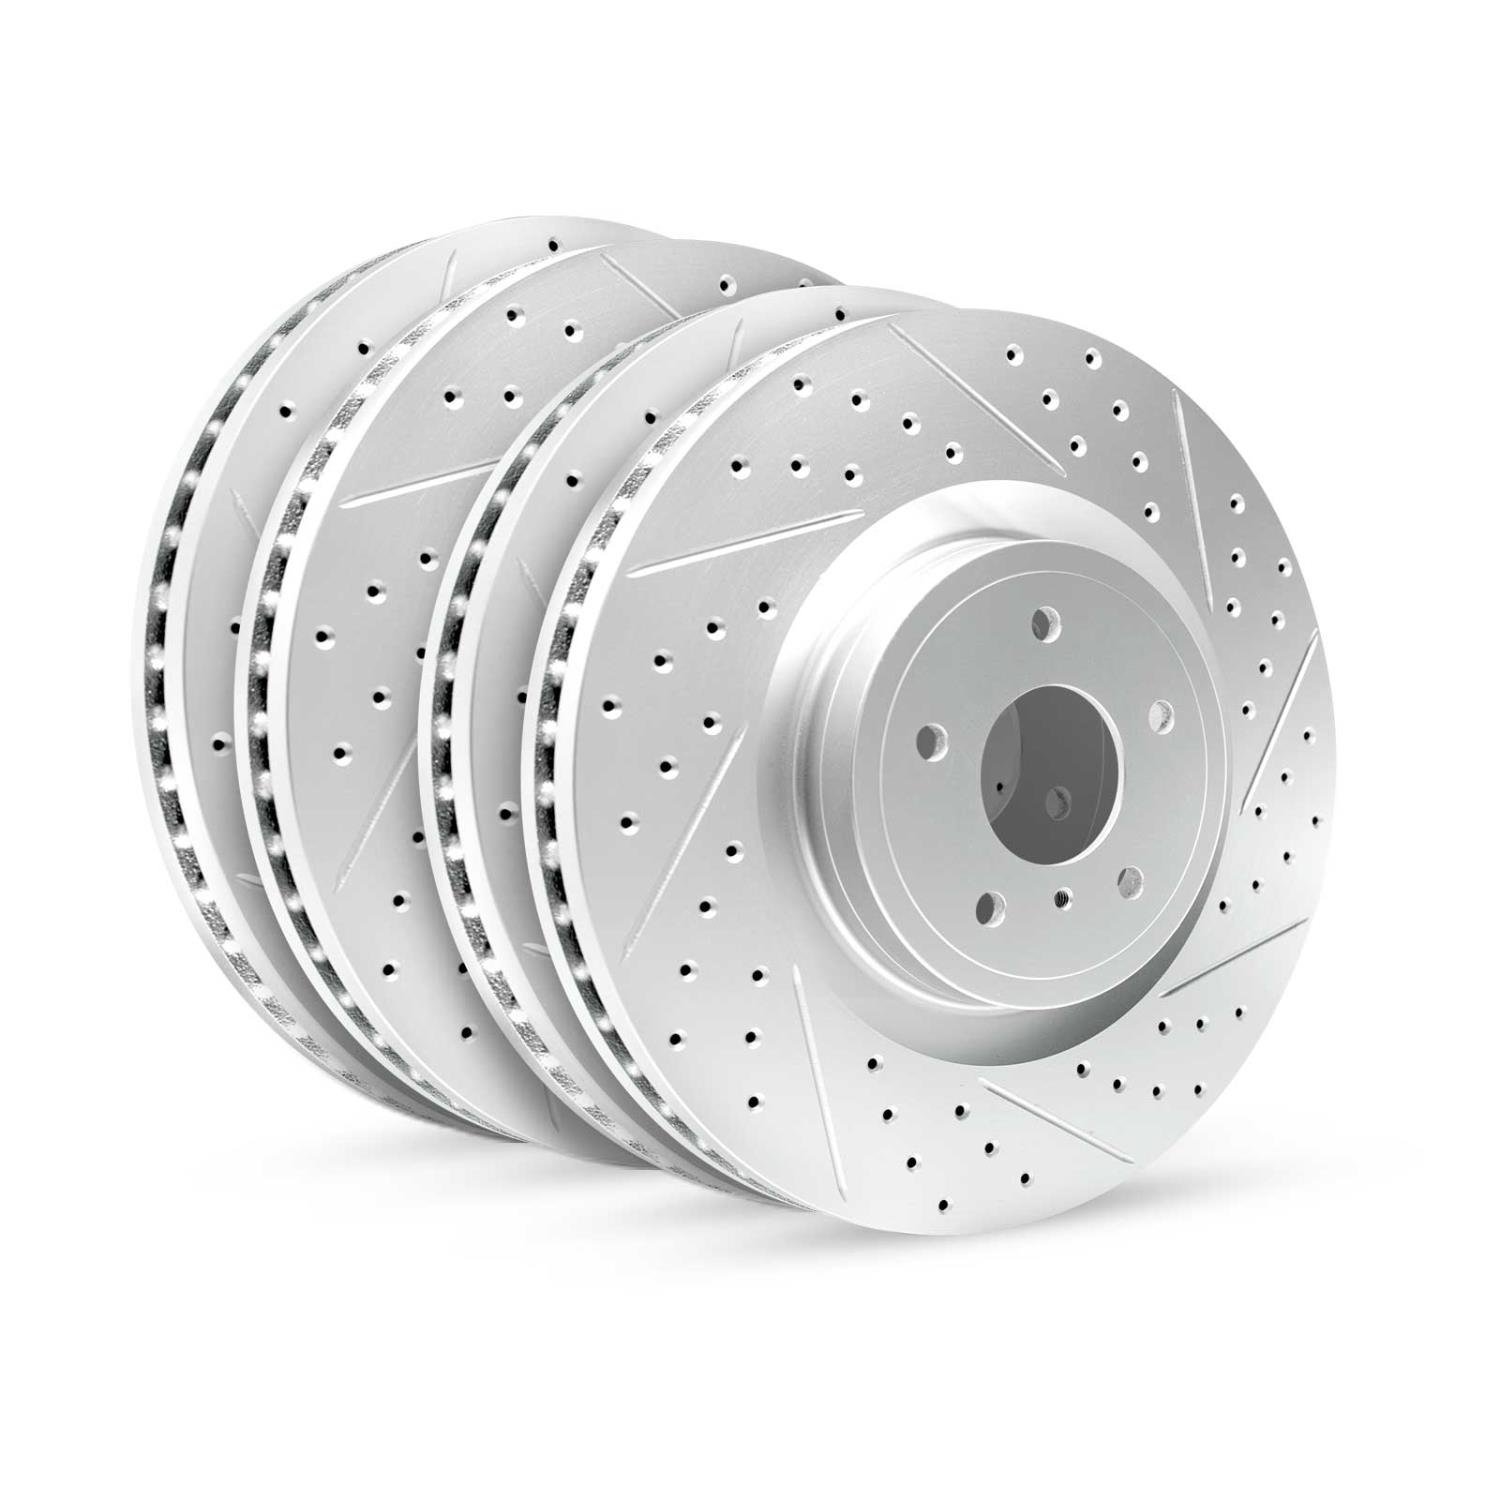 GEO-Carbon Drilled/Slotted Rotors, 2004-2008 Ford/Mazda,